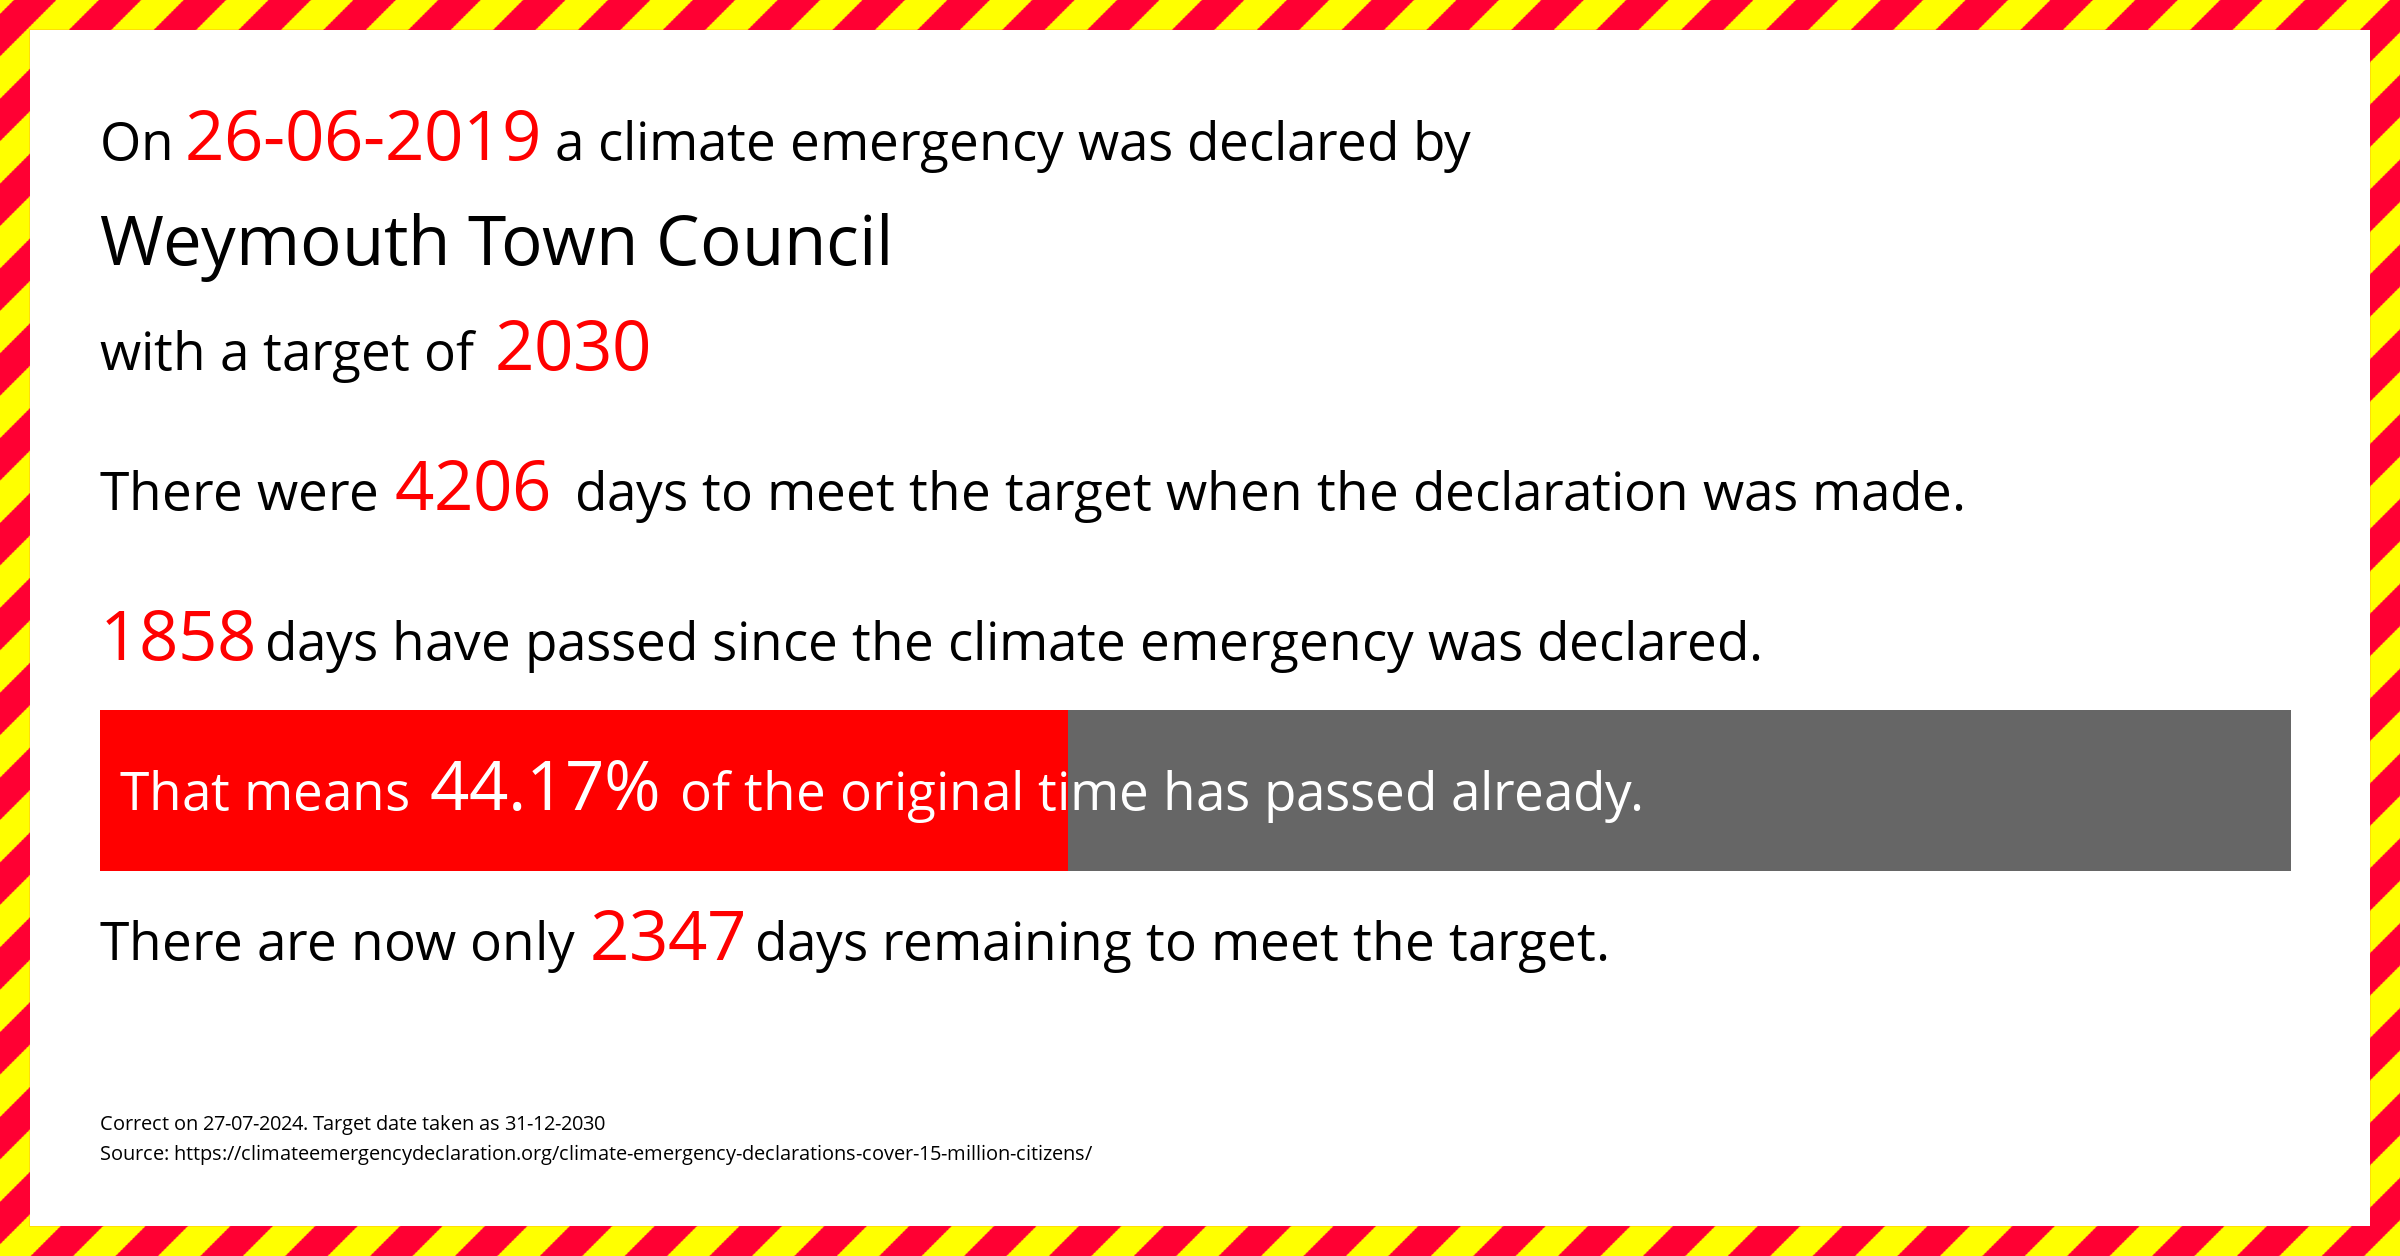 Weymouth Town Council declared a Climate emergency on Wednesday 26th June 2019, with a target of 2030.